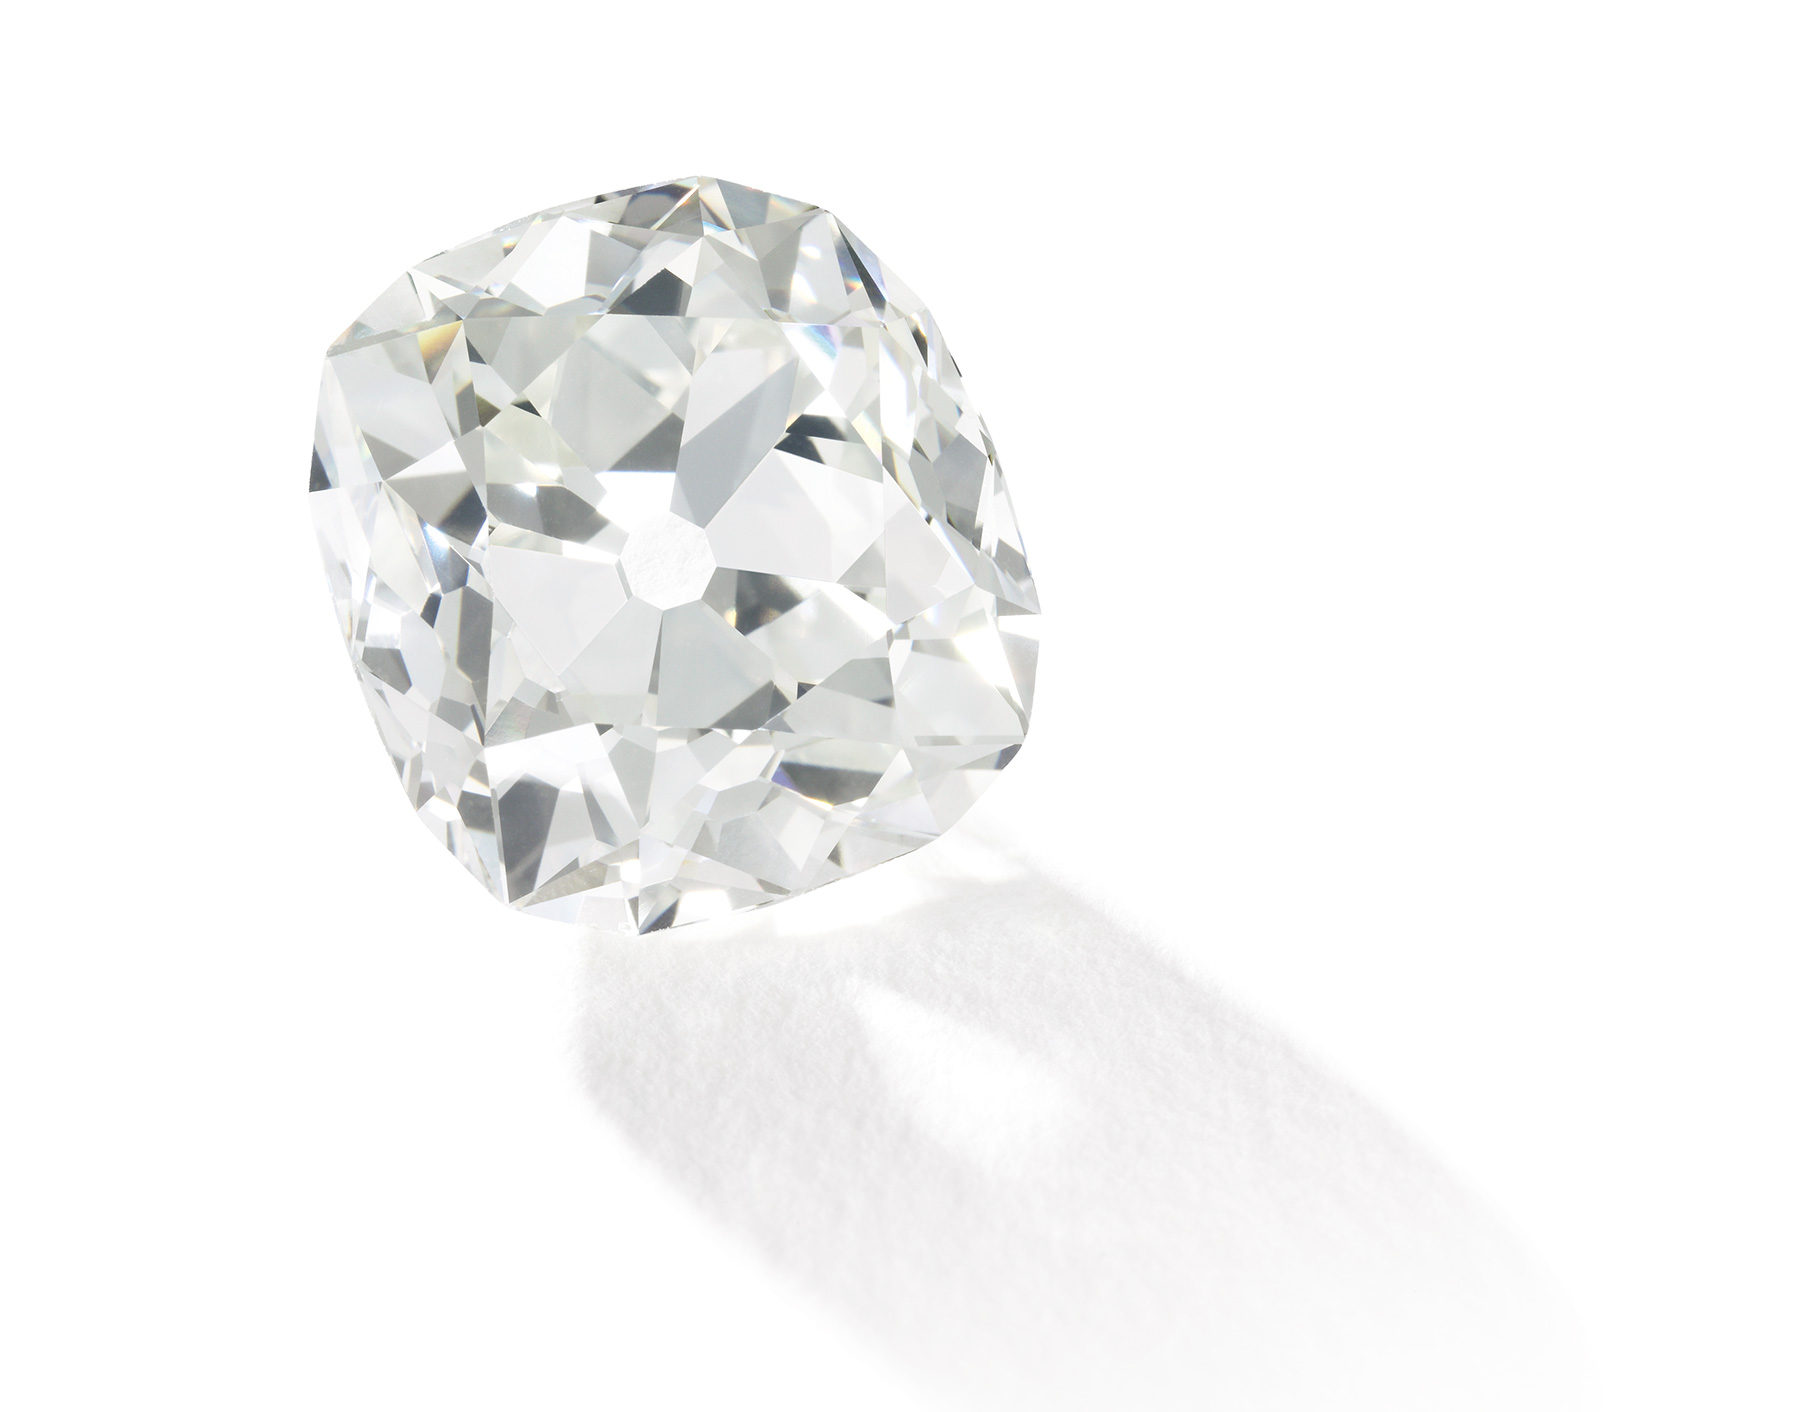 Diamond Bought for $13 Sells for $848K at Sotheby's